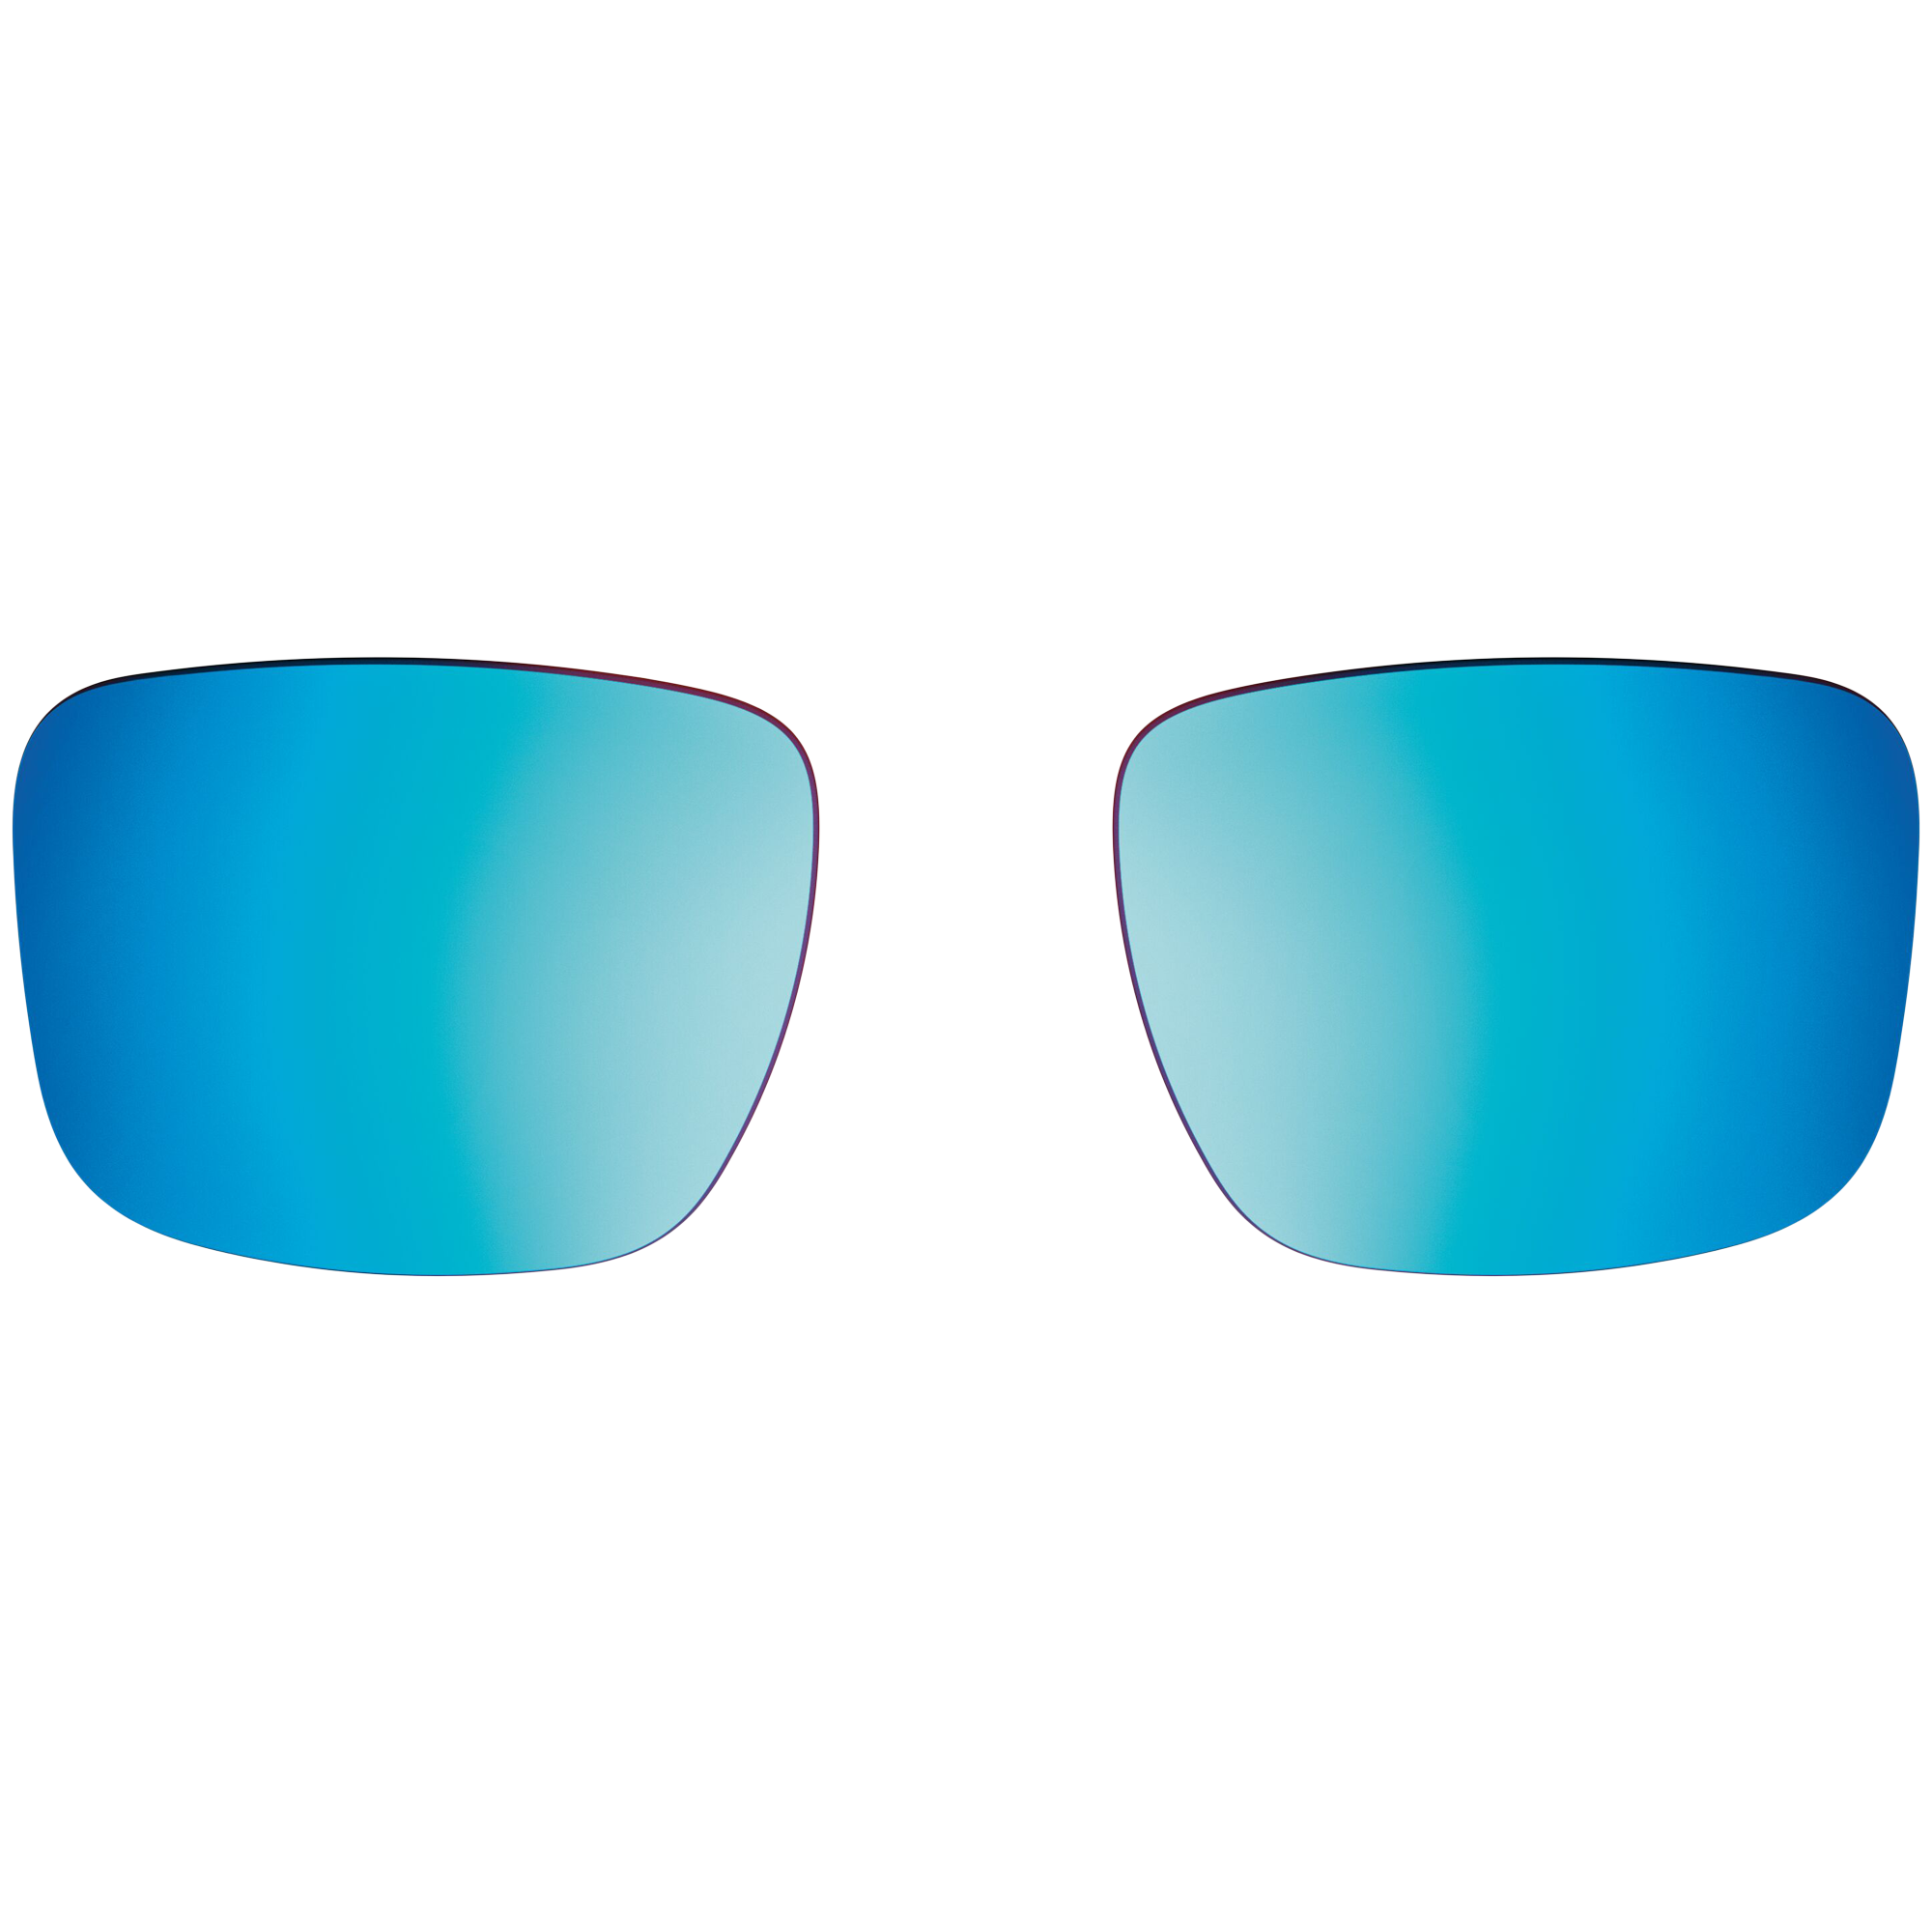 Bose Polycarbonate Replacement Lenses (Blocks Up to 99 Percent UVA/UVB Rays, 855977-0500, Mirrored Blue)_1